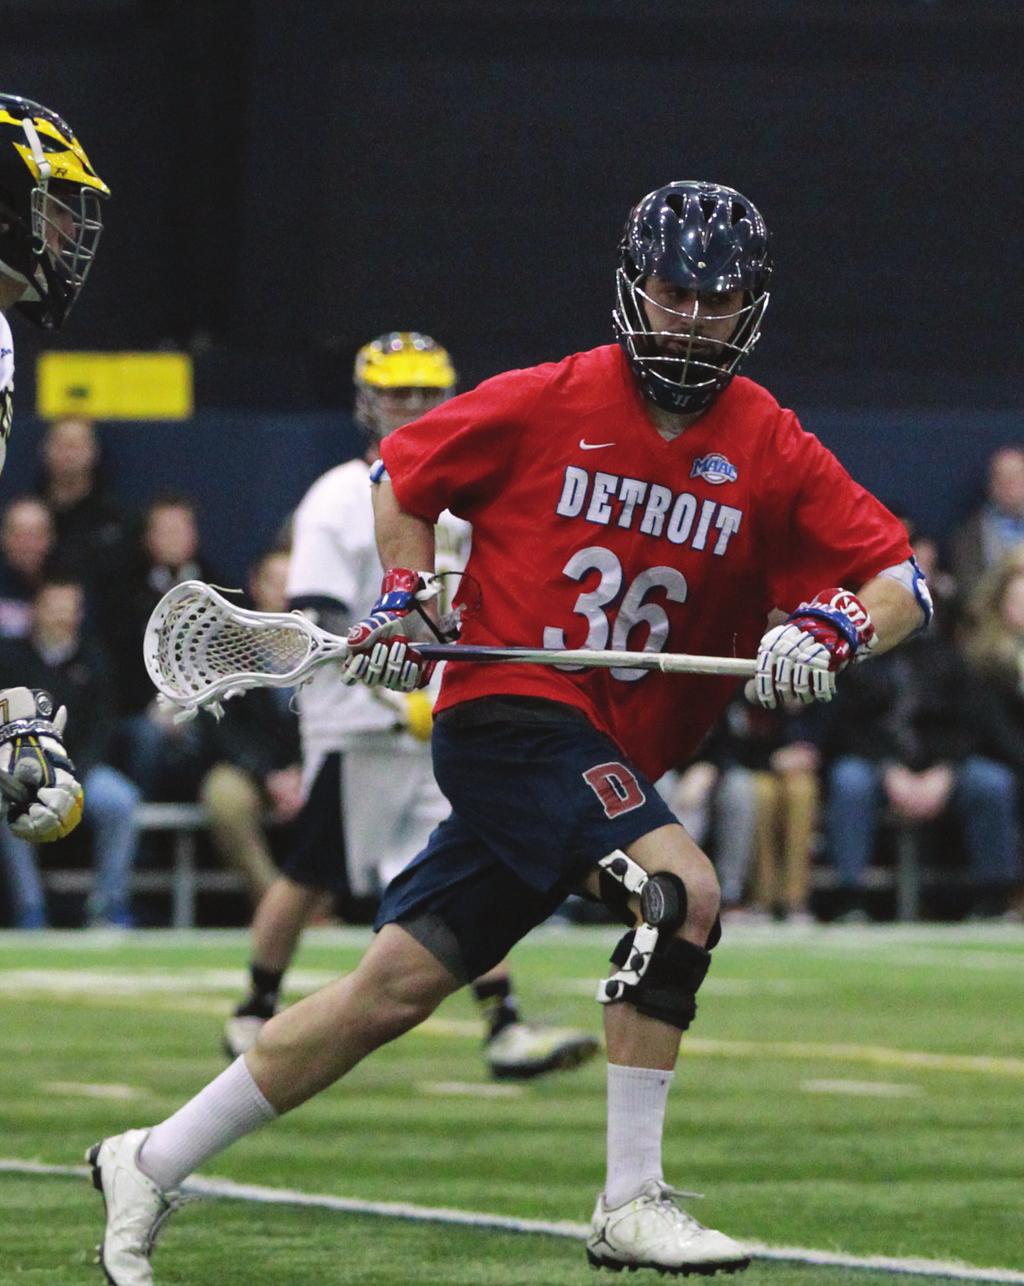 Detroit Mercy Lacrosse Timeline March 4, 2015 - Sophomore Jason Weber broke his own school record with 28 saves and eight Titans netted goals on the afternoon as the University of Detroit Mercy men s